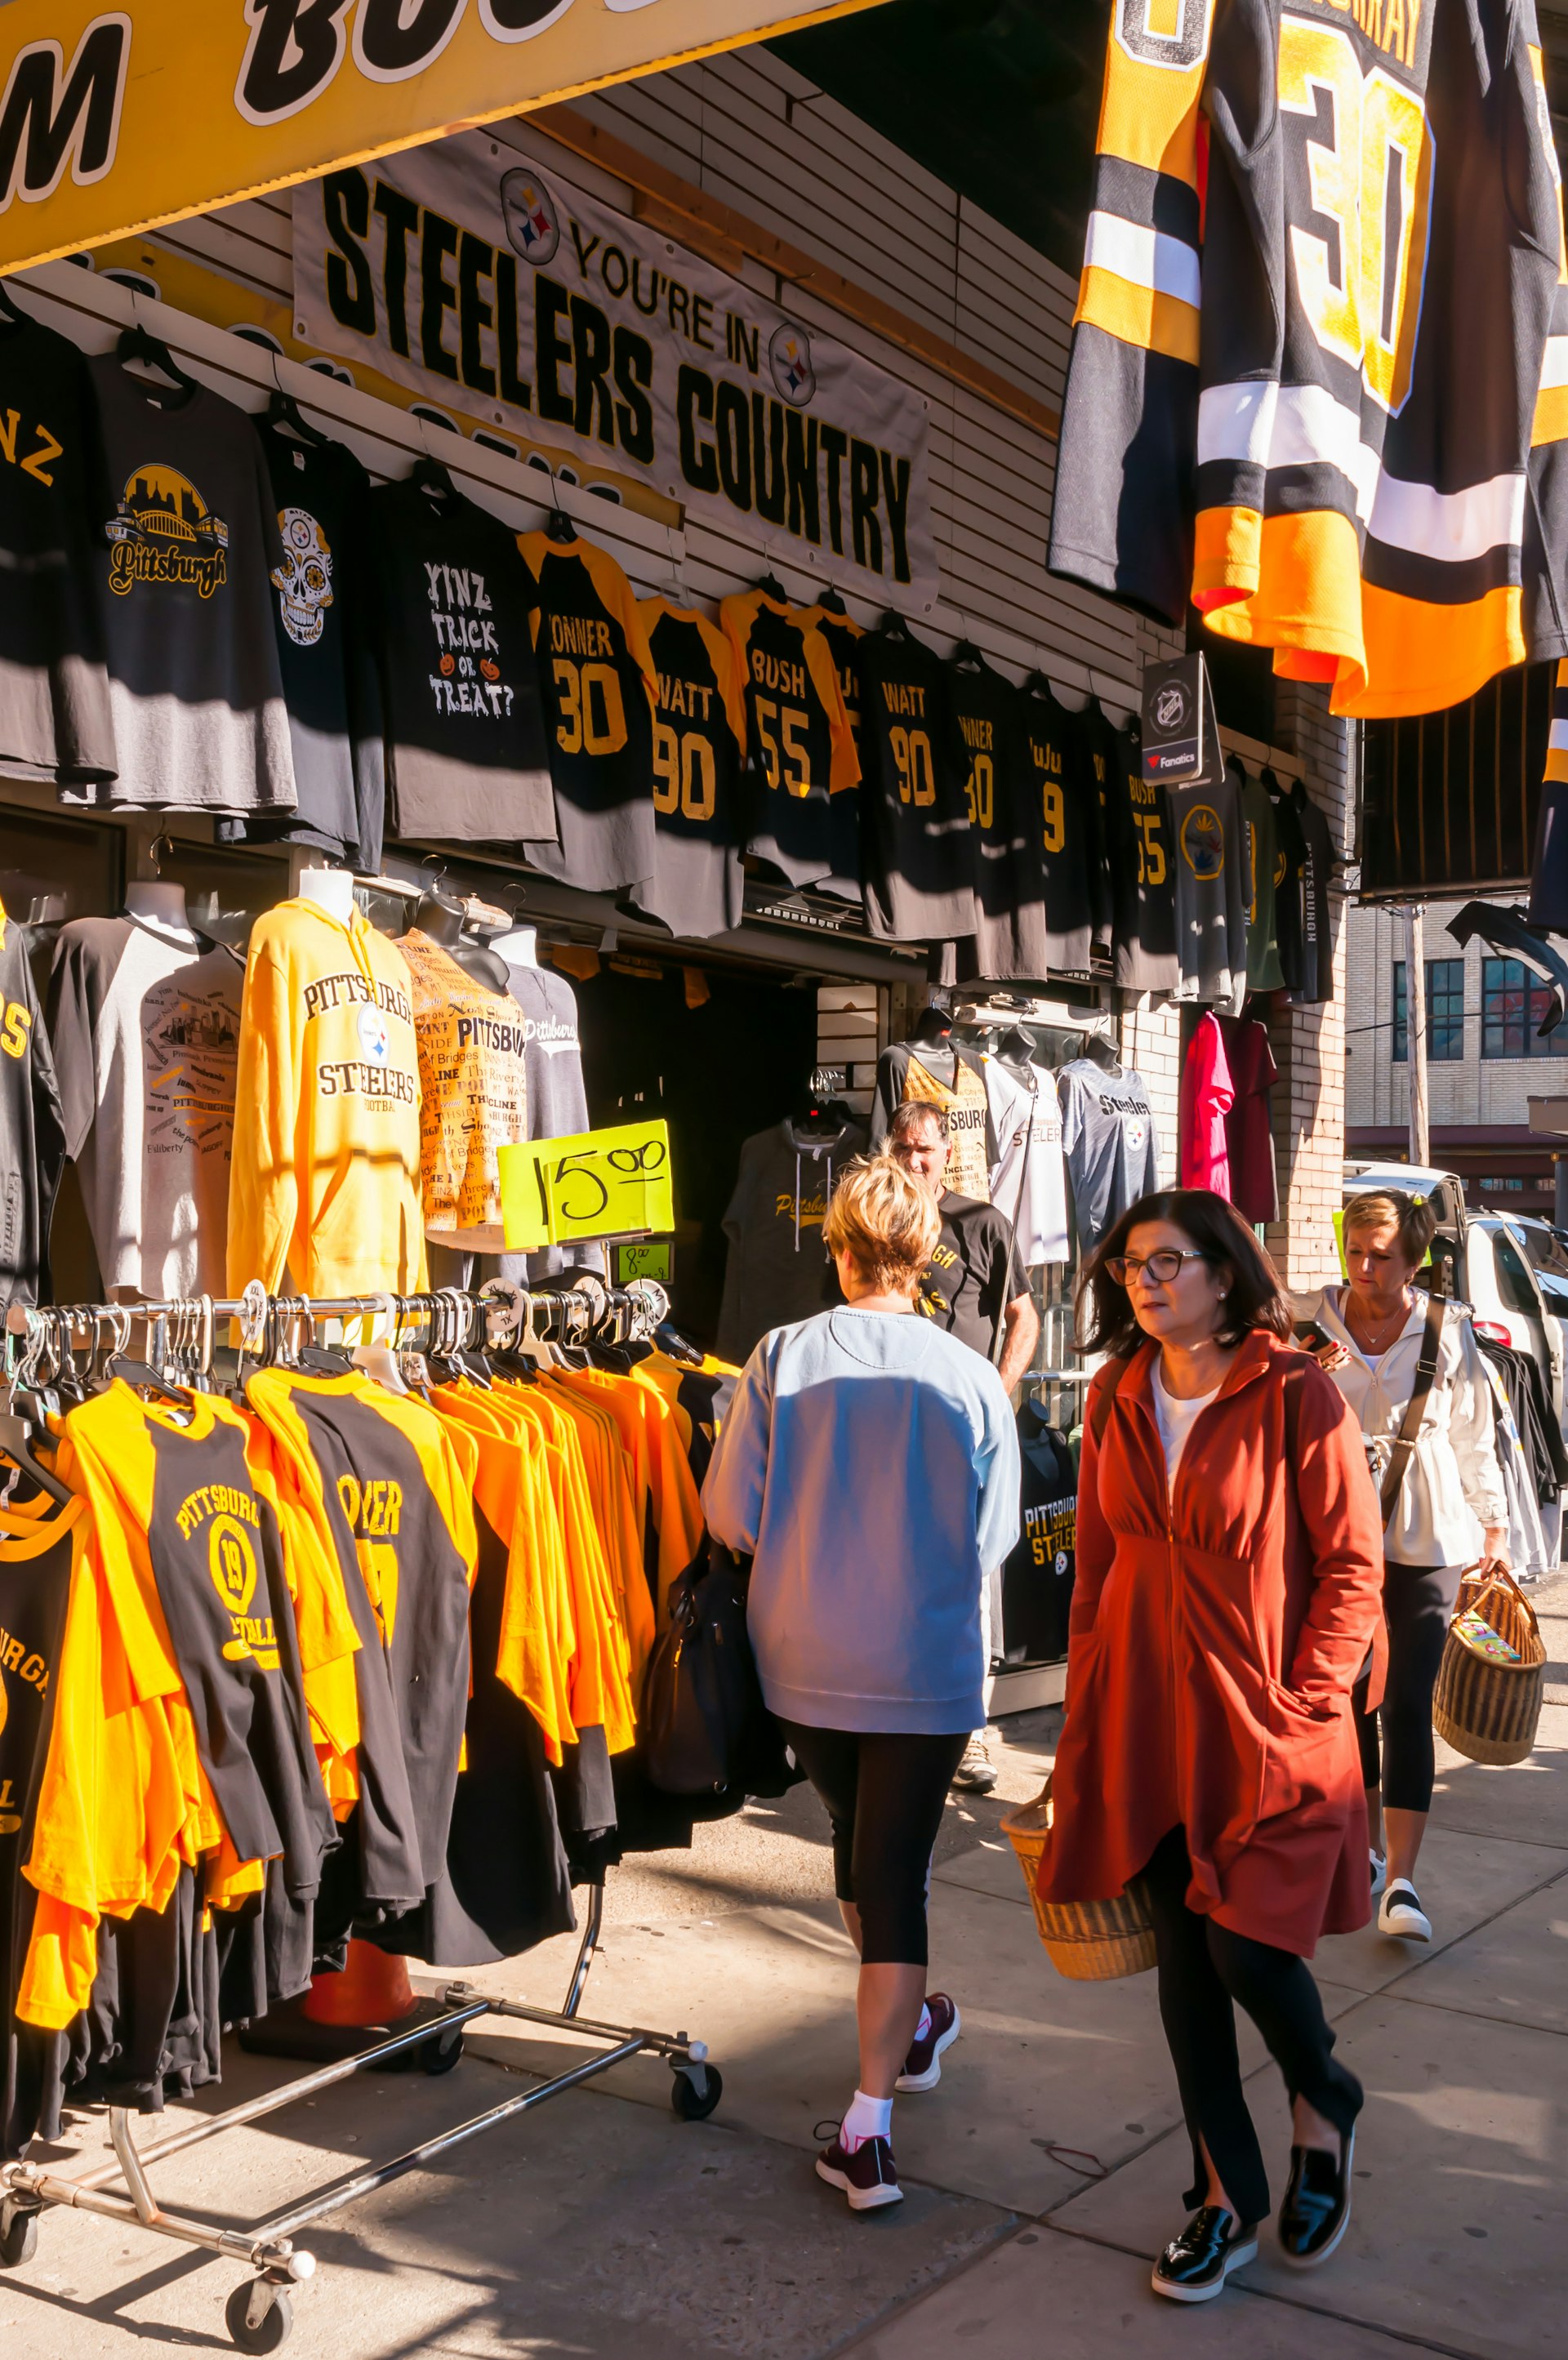 People in front of a store on Penn Avenue in the Strip District selling Pittsburgh related sports teams clothing and items